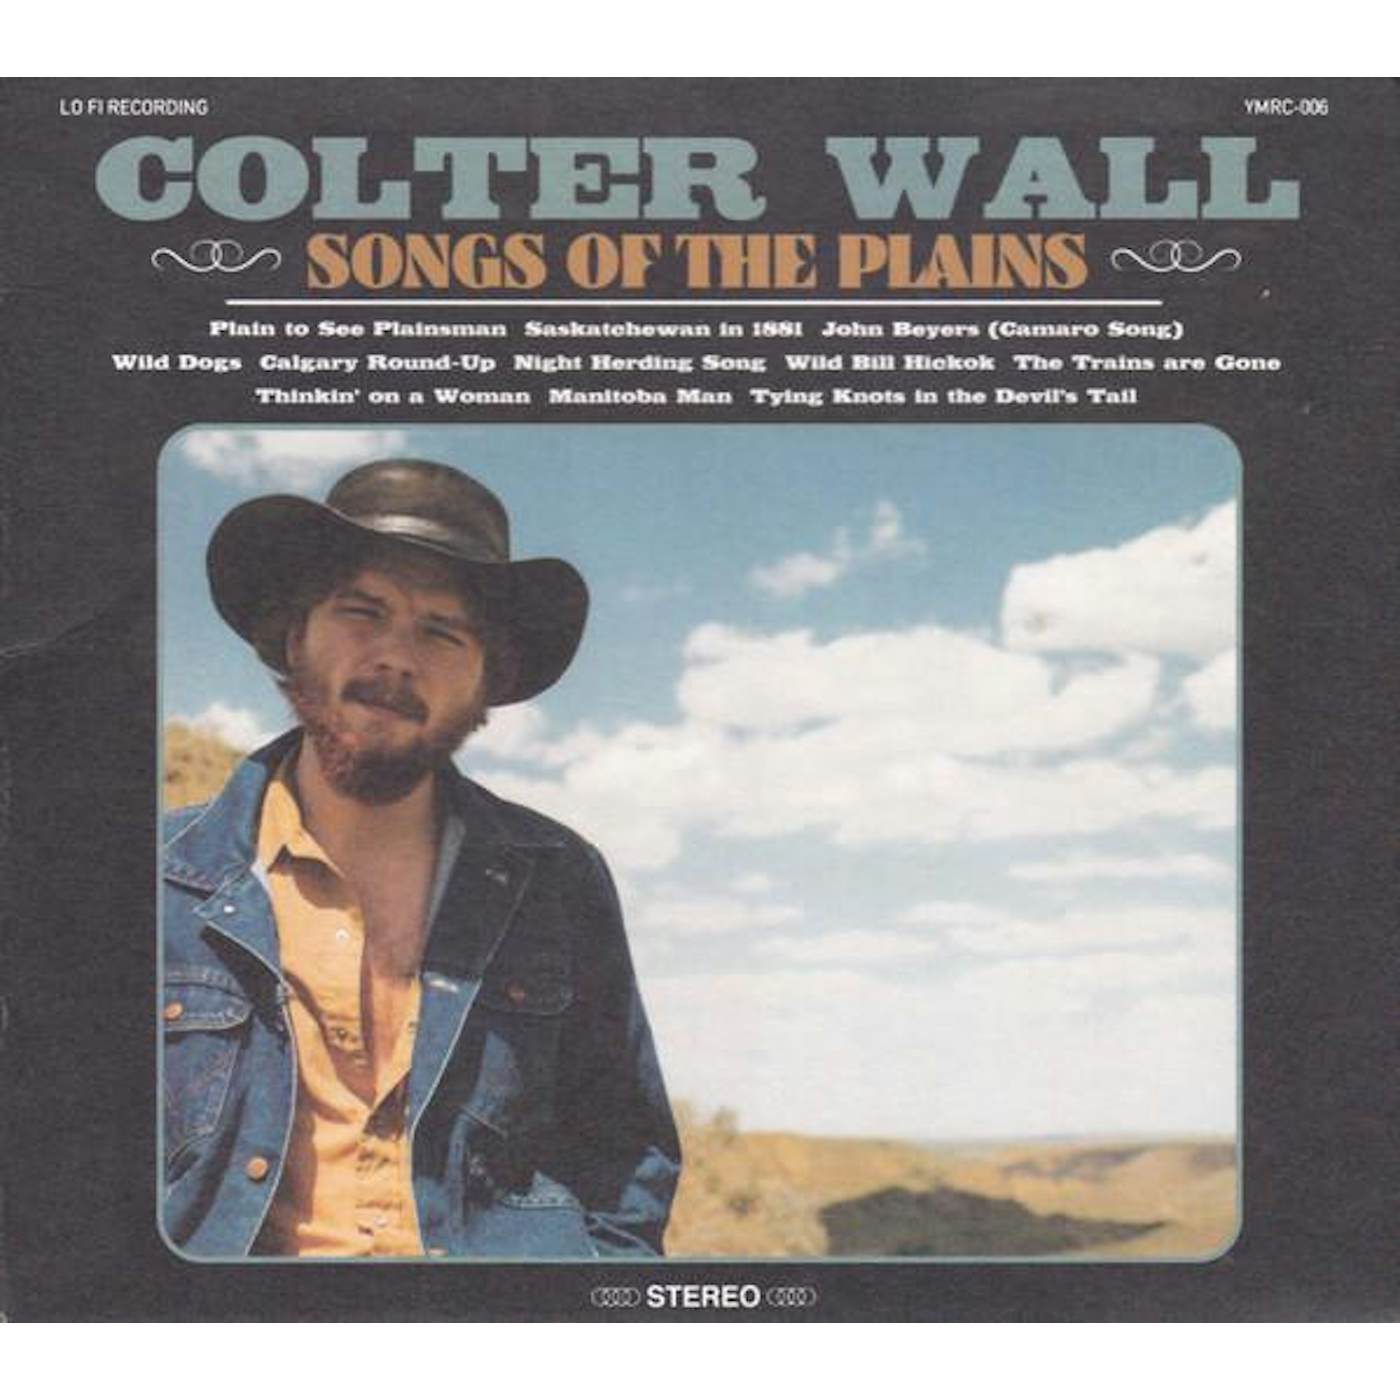 Colter Wall SONGS OF THE PLAINS CD